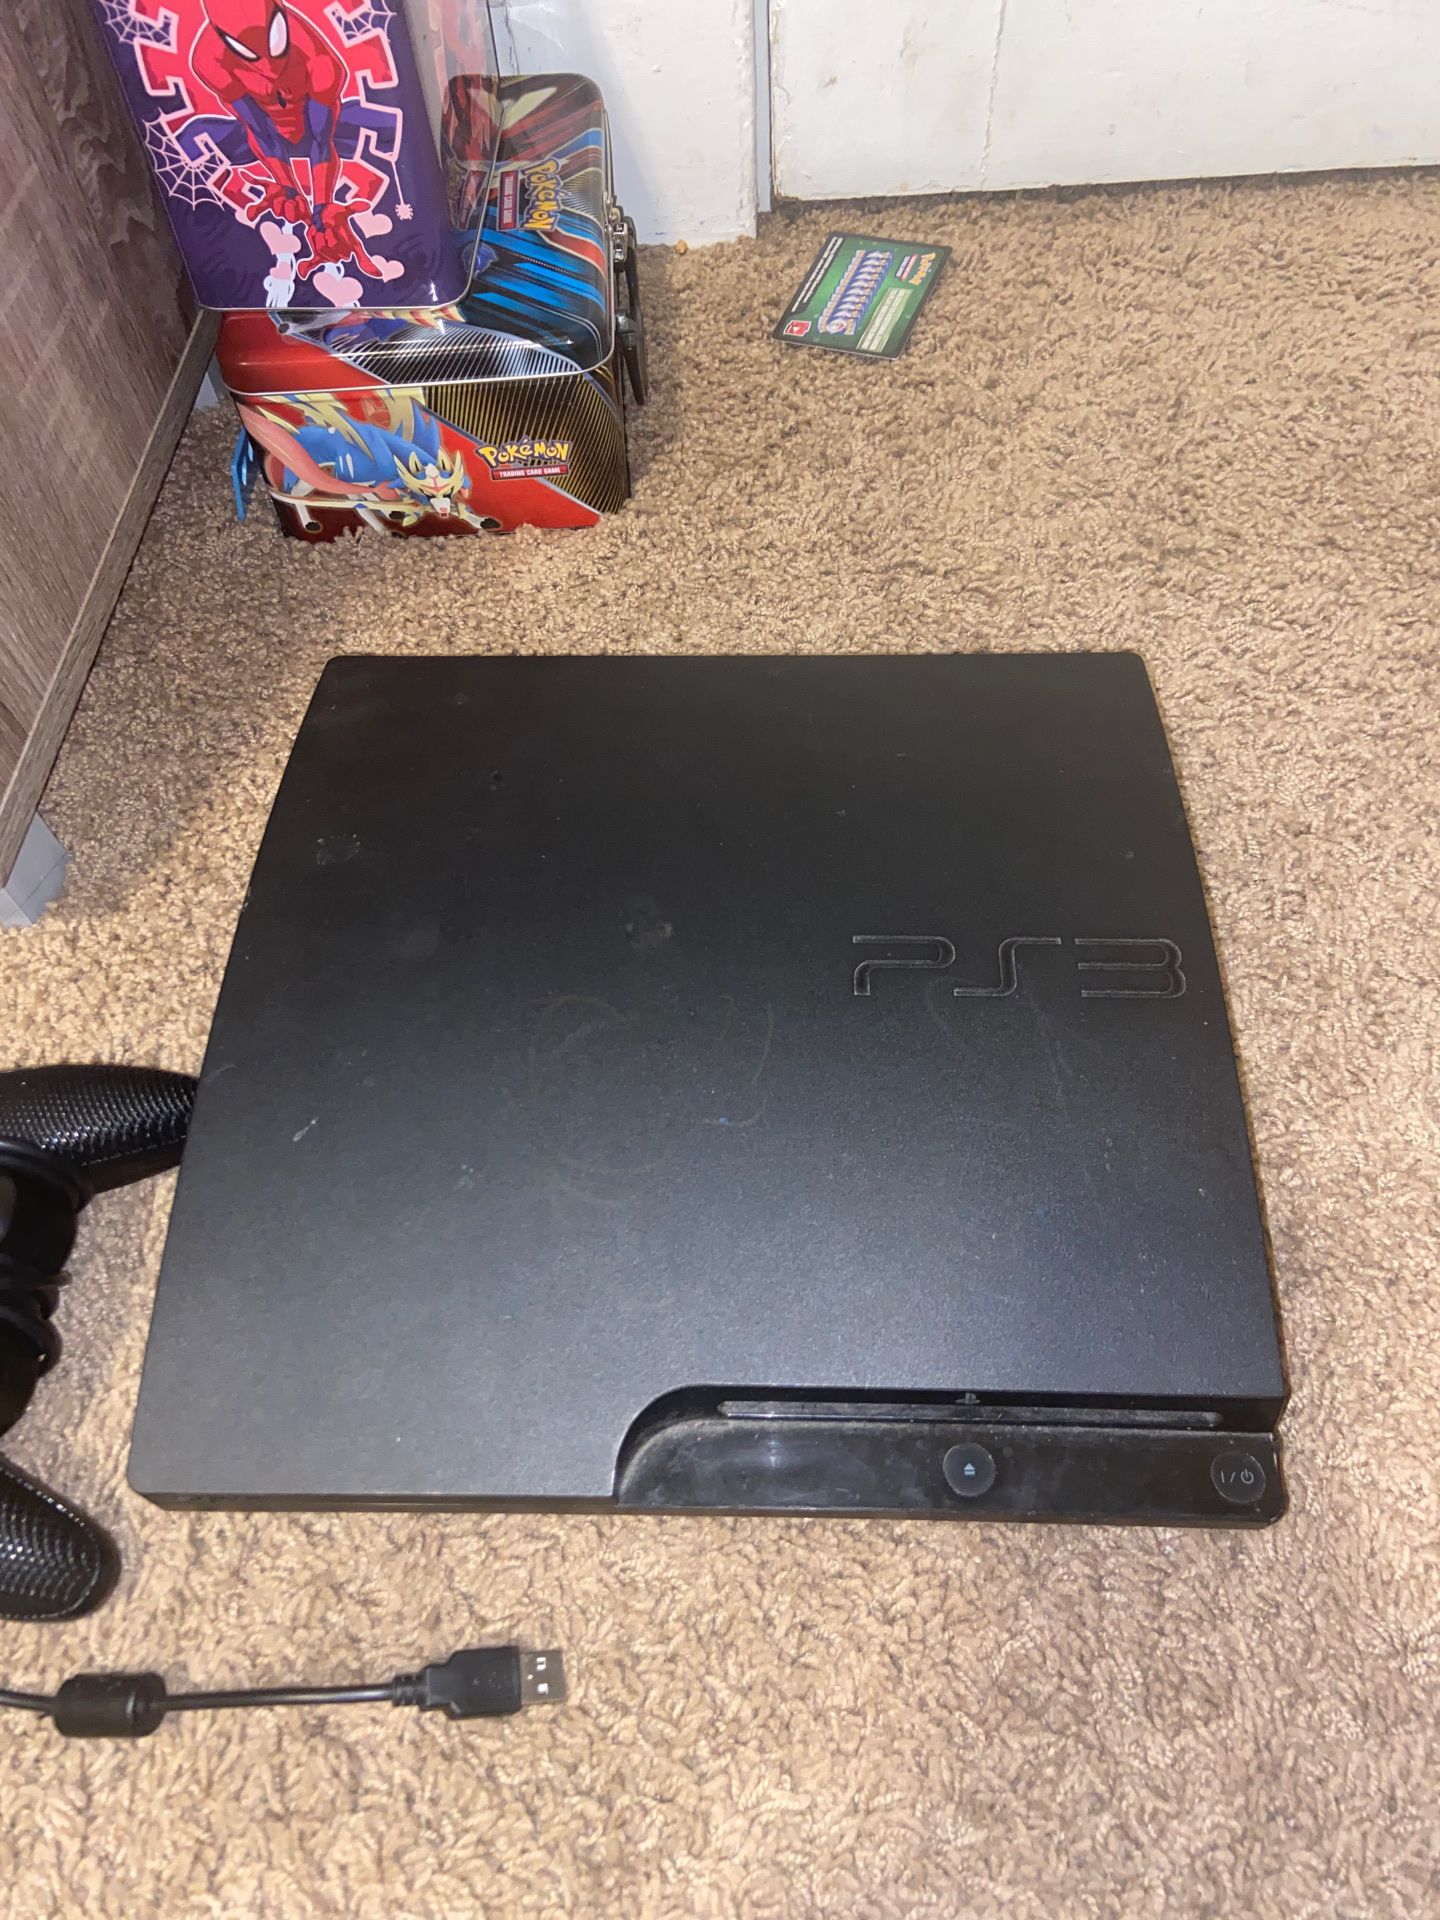 PS3 w/ controller & all games